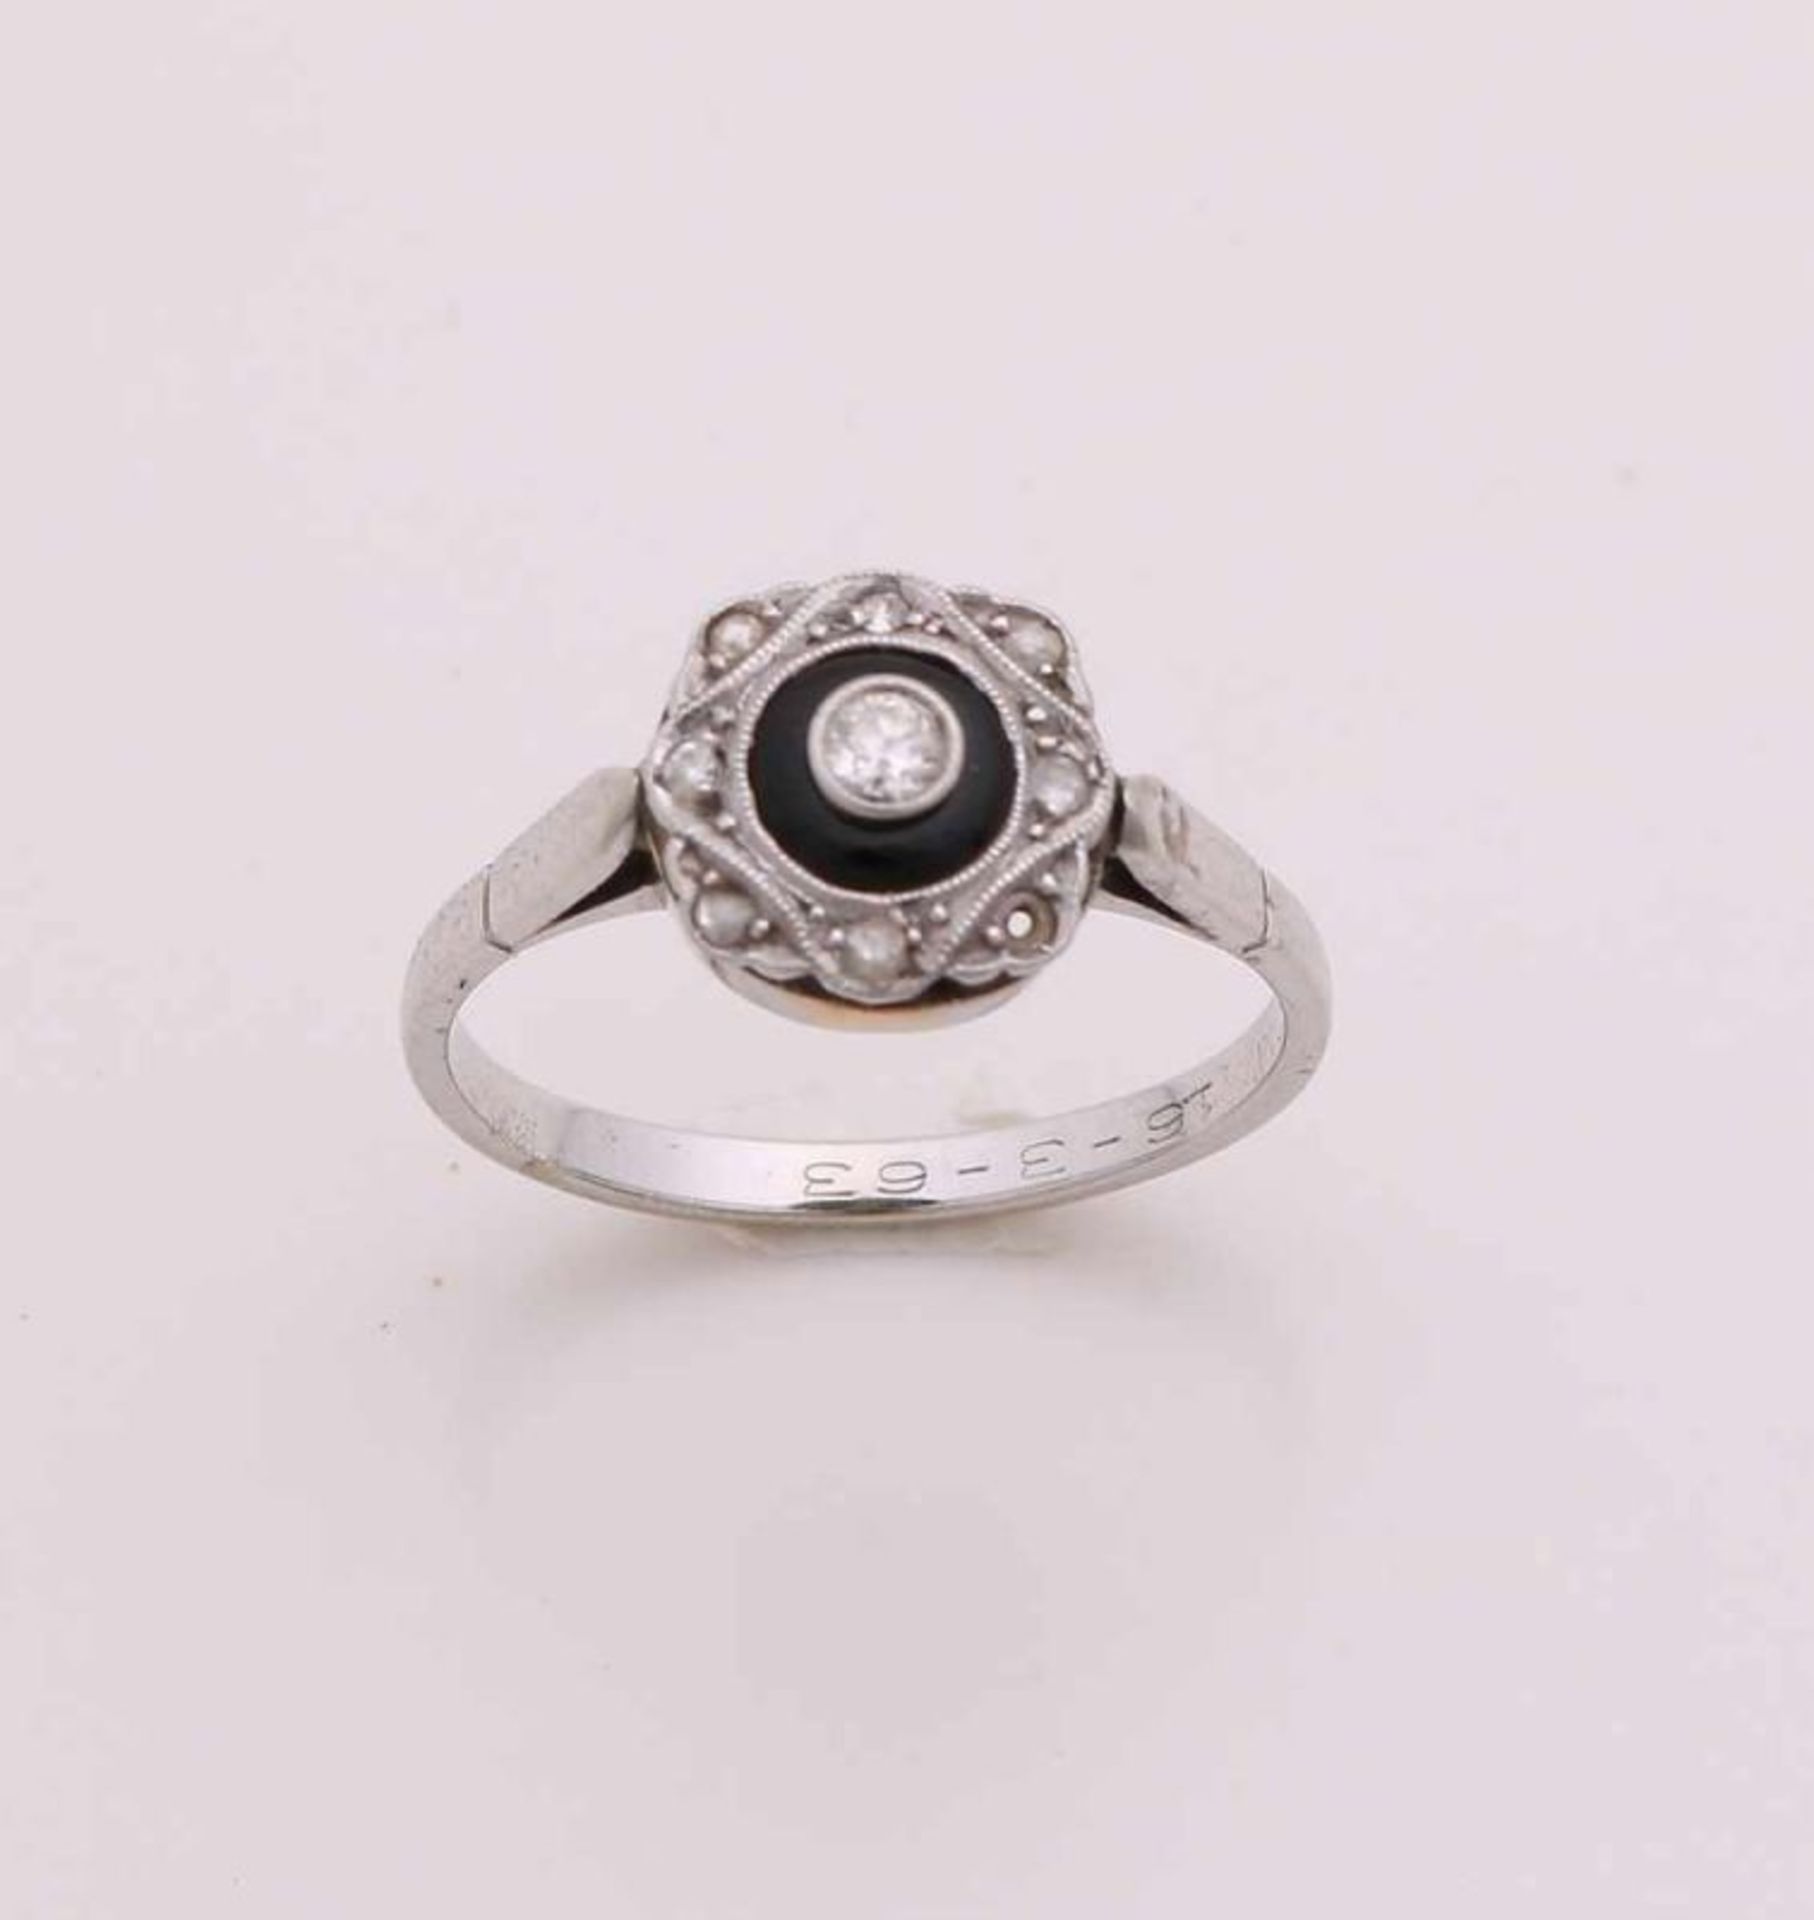 White gold ring, 585/000, Art Deco style with square contoured head, 9,5x9,5mm., With an onyx ring